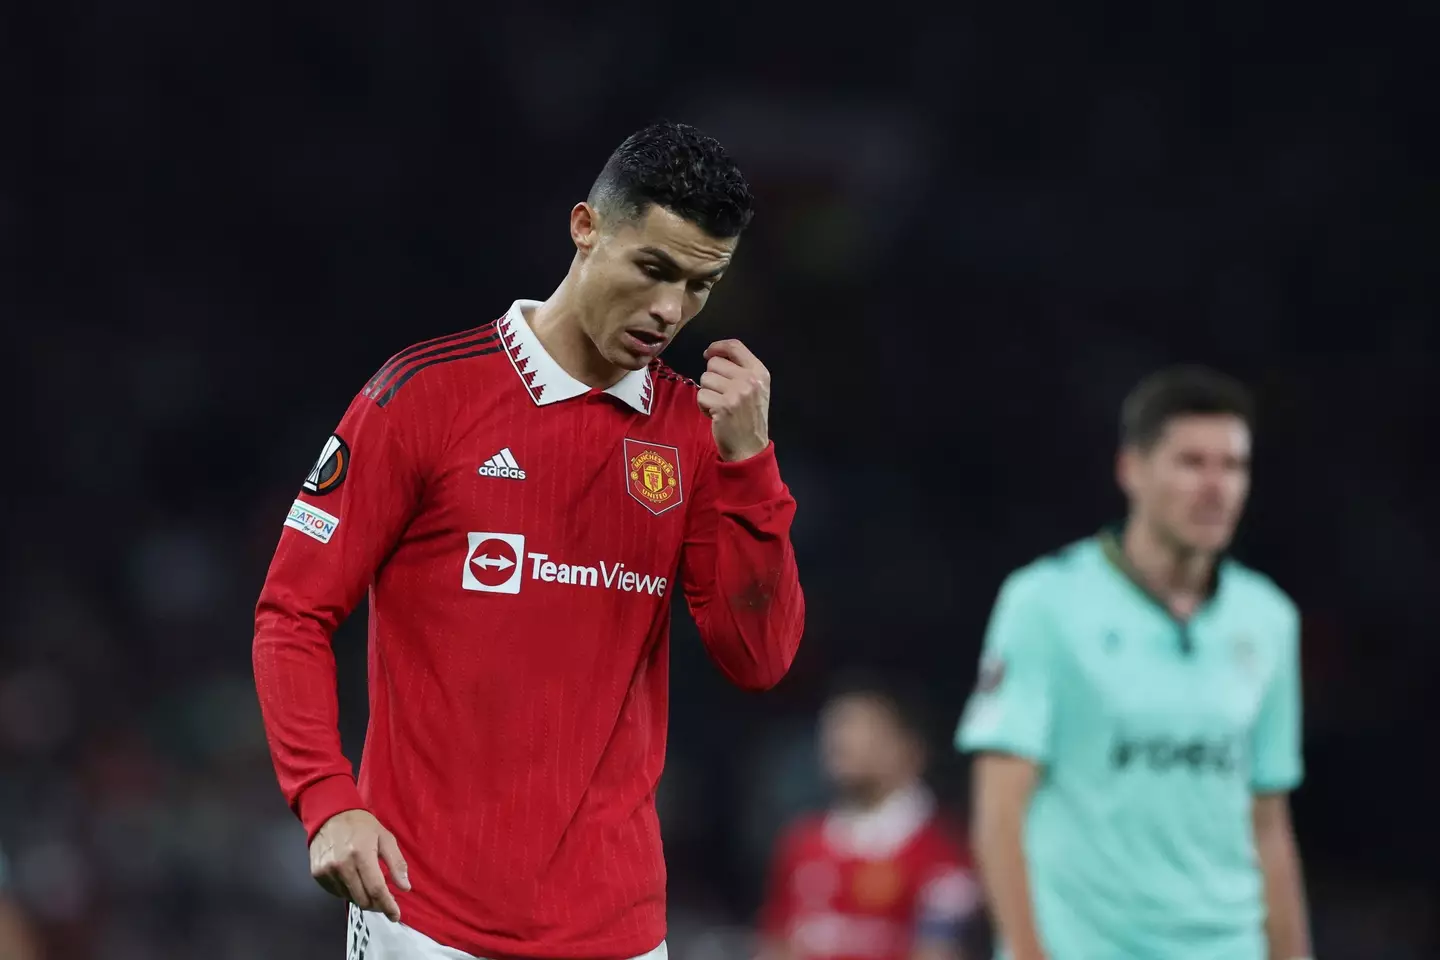 Ronaldo has been banished from United's first-team squad (Image: Alamy)